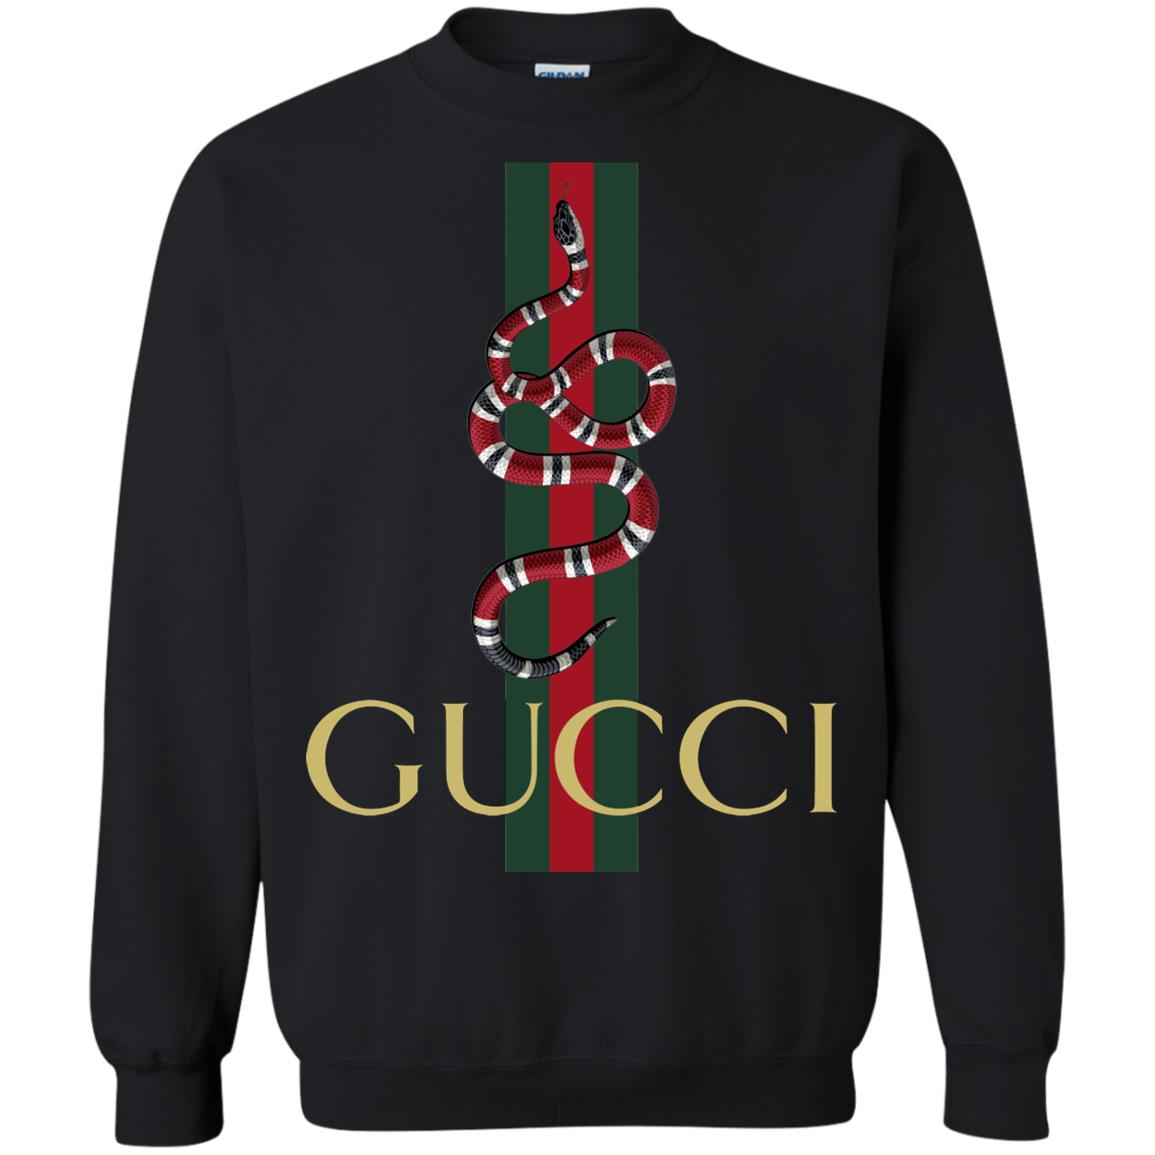 gucci sweater with snake | AWOL Cash